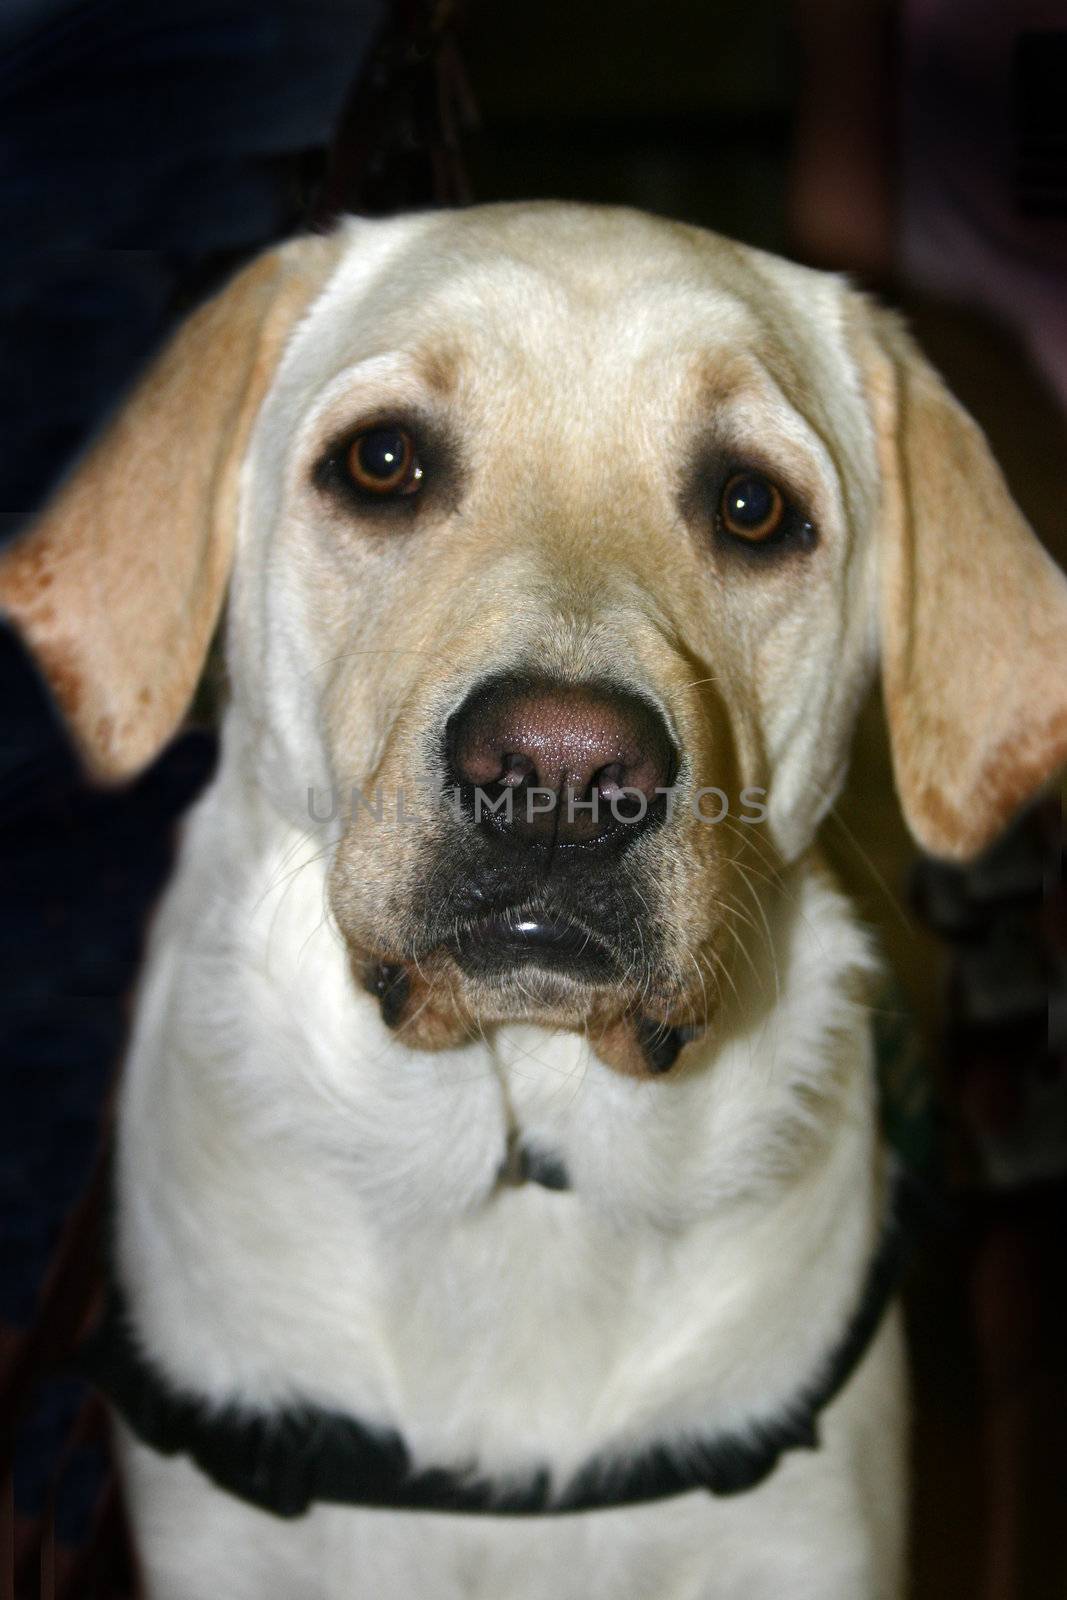 A yellow labrador retriever puppy (Canis lupus familiaris) in training to be an assistance dog against a black background.  Focus on his nose.